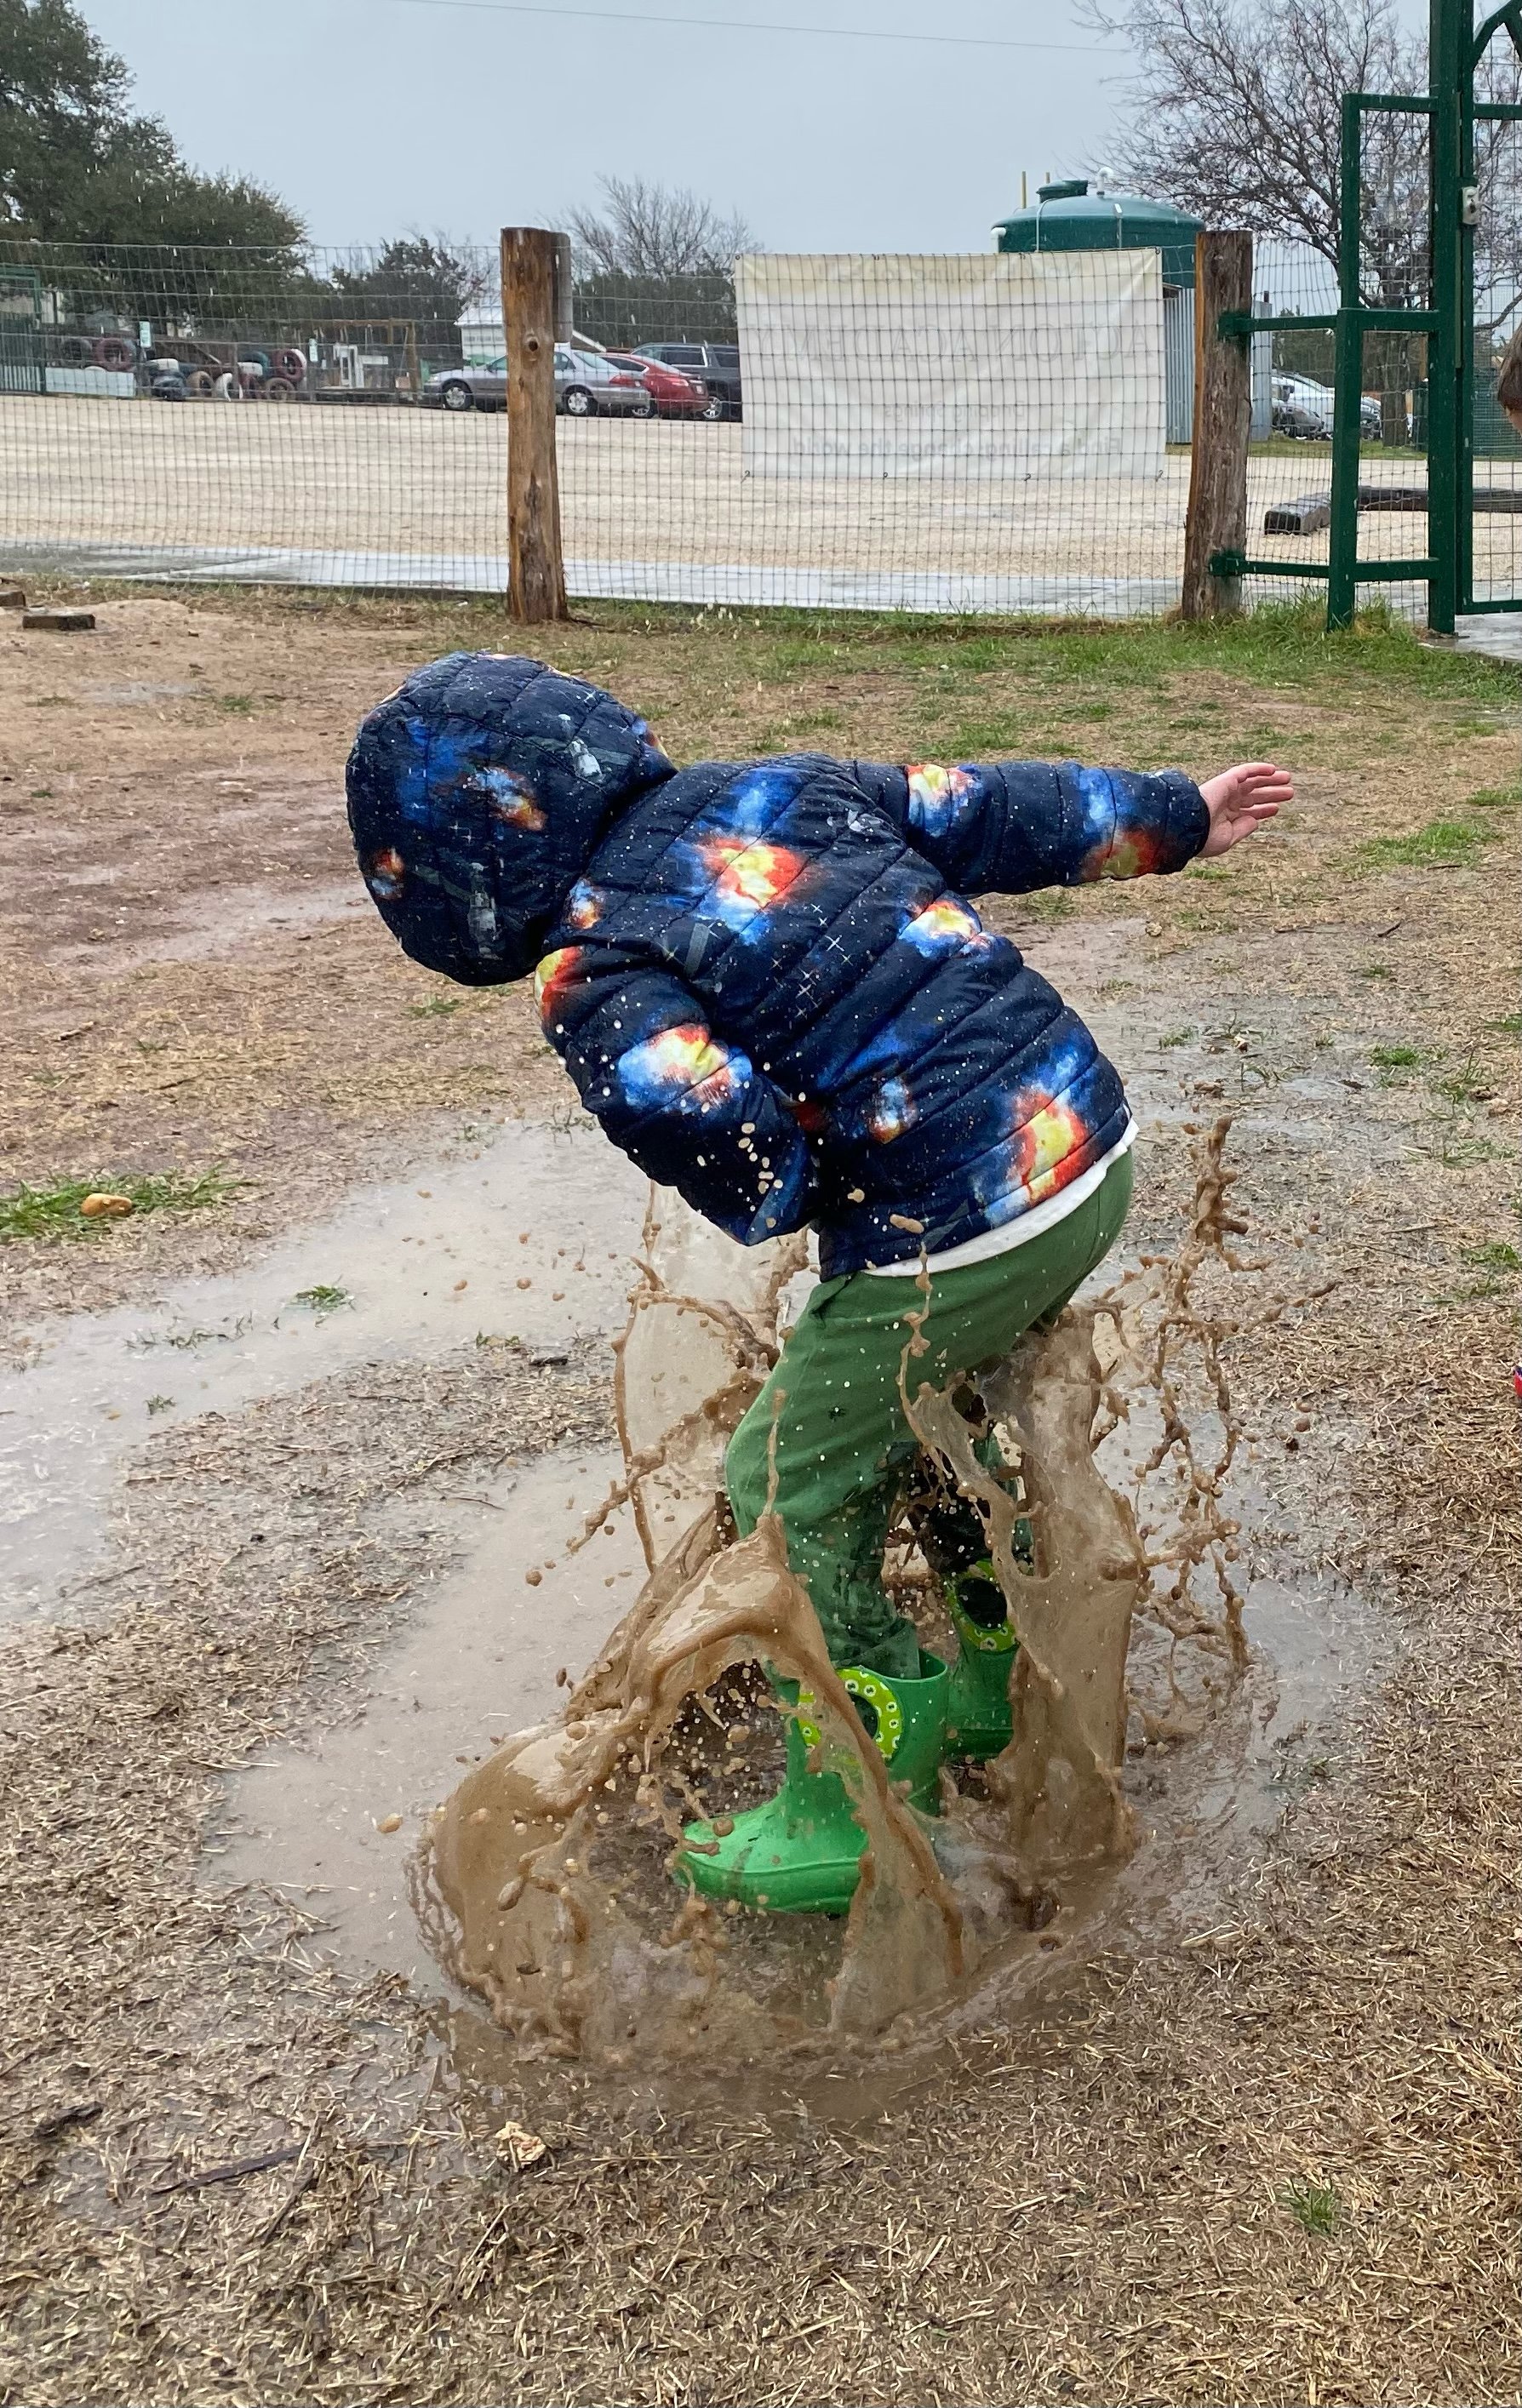  Every time it rains enough to make mud, we poll our students at Havenwood and the findings are always the same. 100% of survey respondents agree that mud days are the best days! 